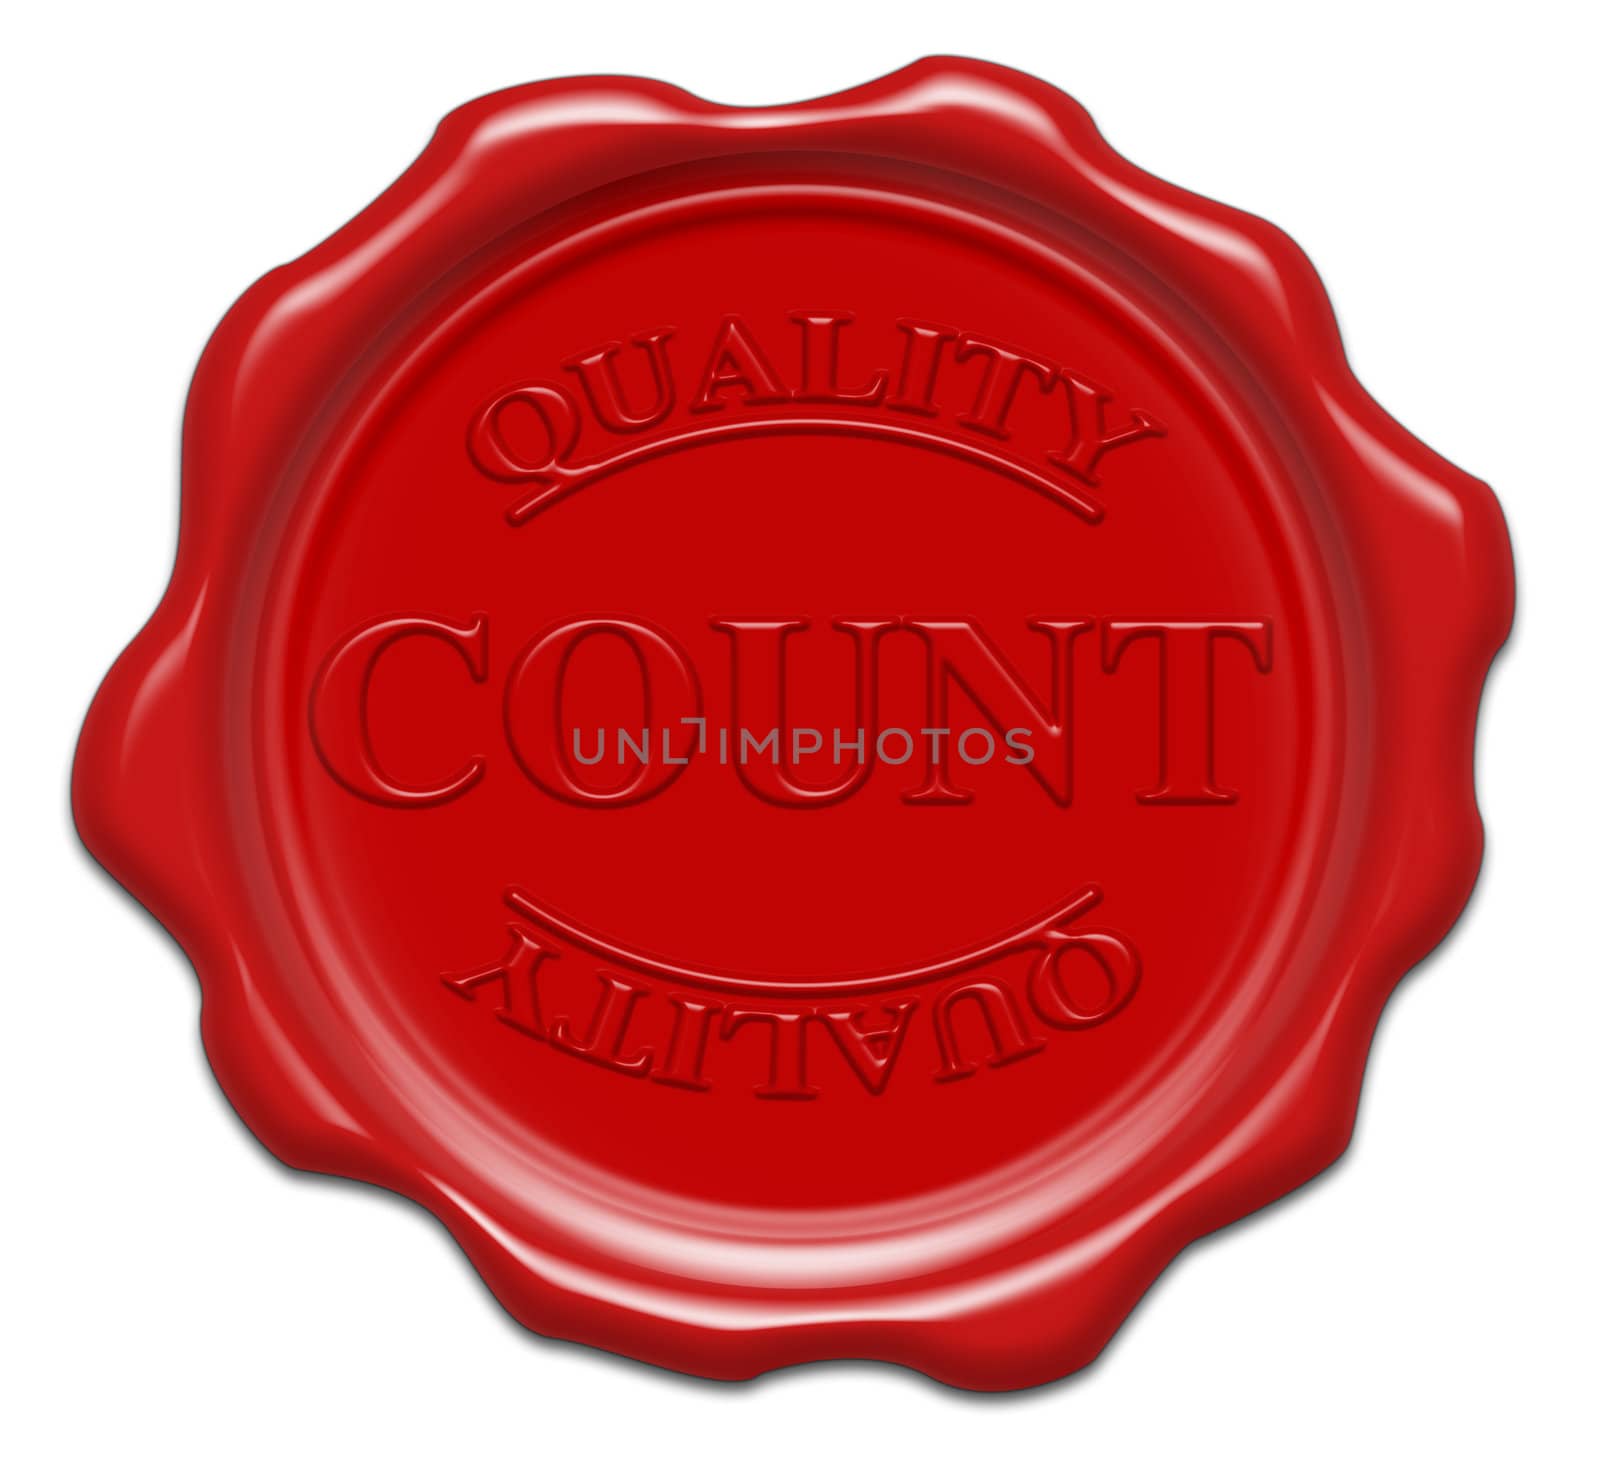 quality count - illustration red wax seal isolated on white background with word : count